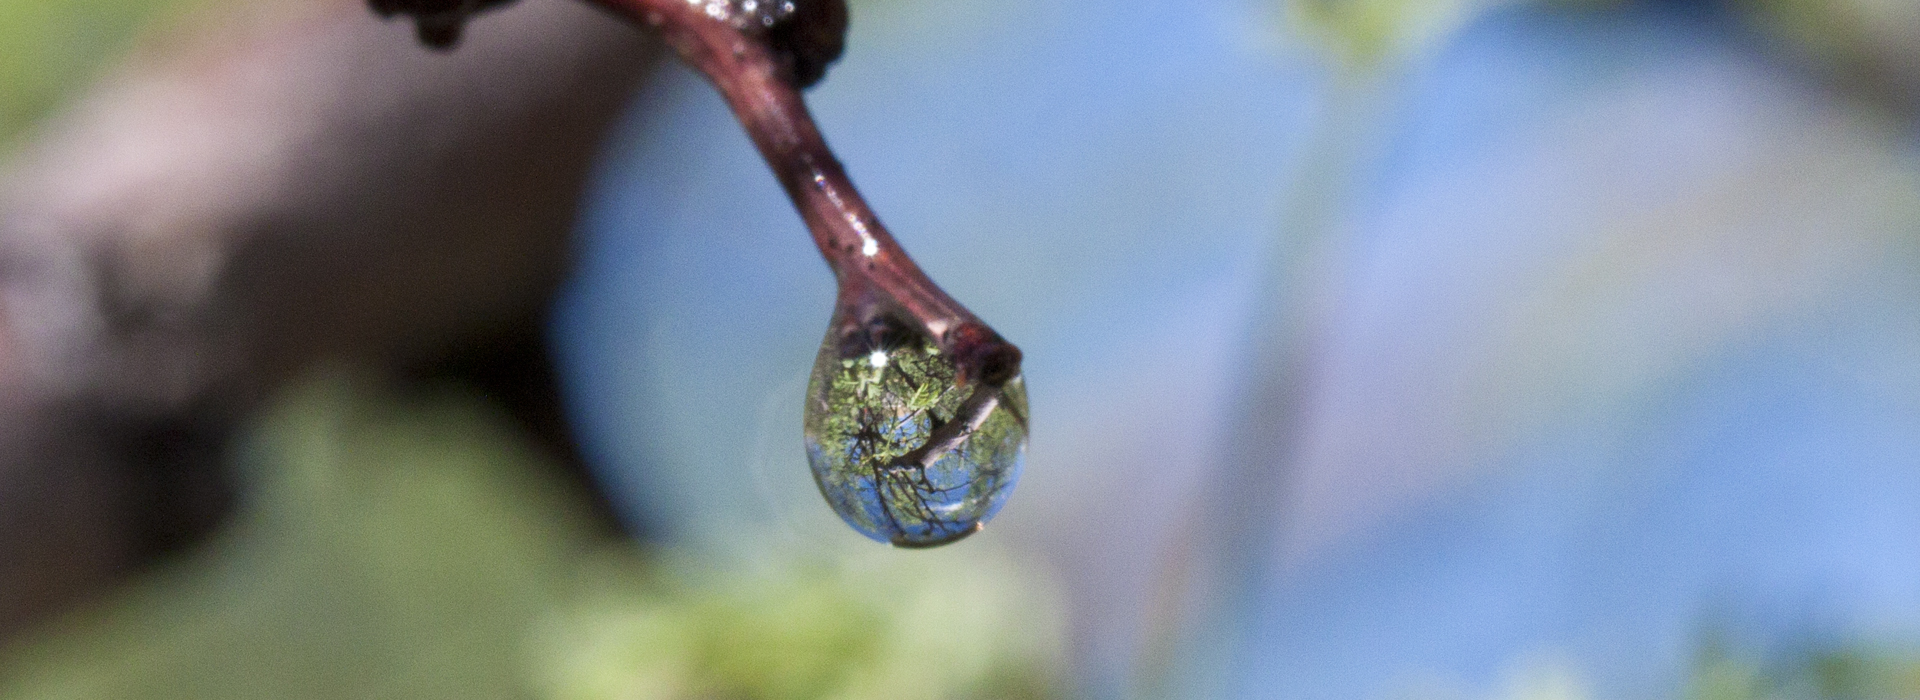 A water drop hangs from the end of a twig after a short monsoon storm in Southern Arizona. The tress behind are refracted through the droplet in sharp focus